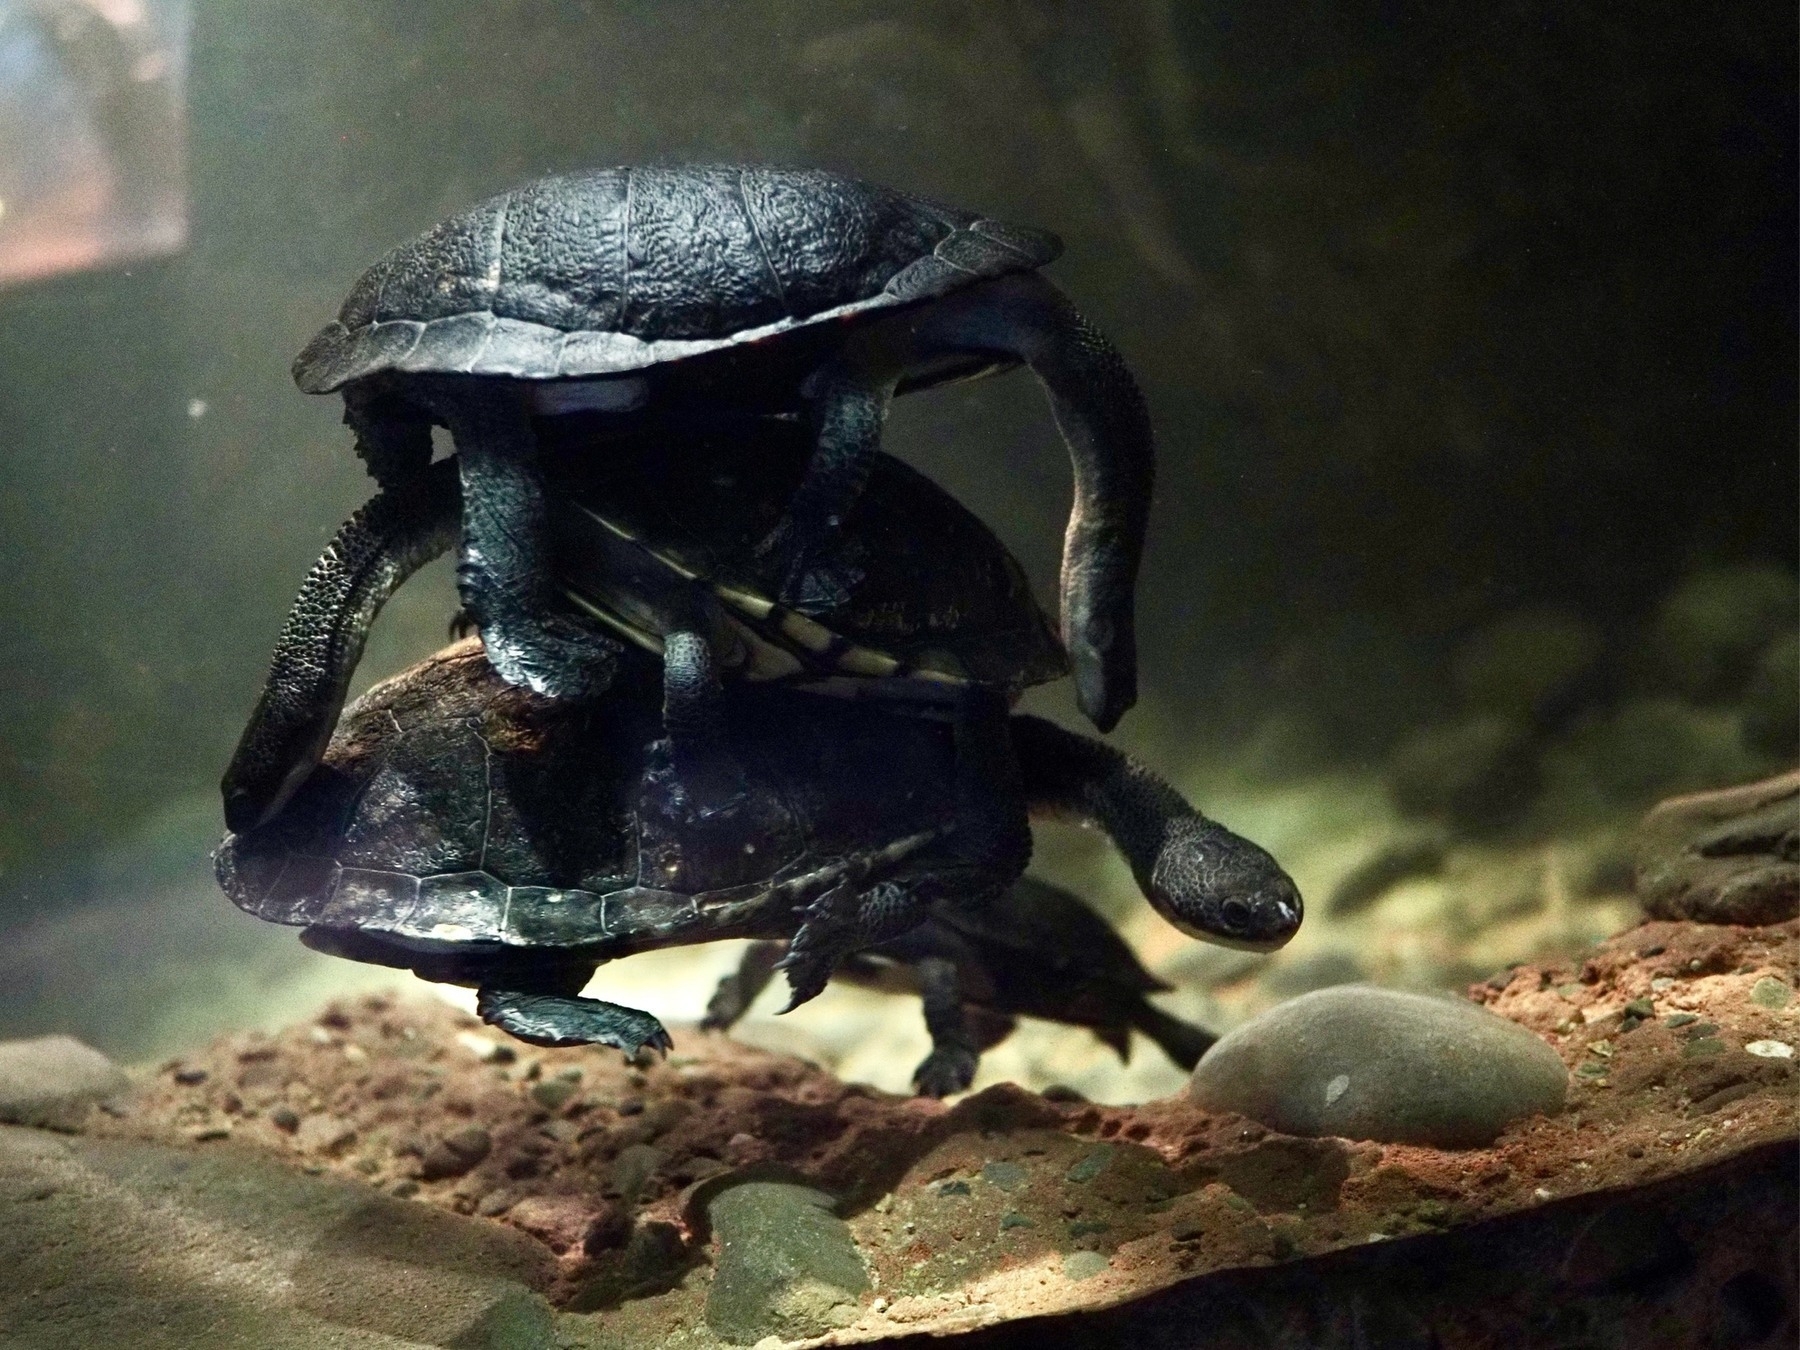 Entangled, floating turtles in a tank